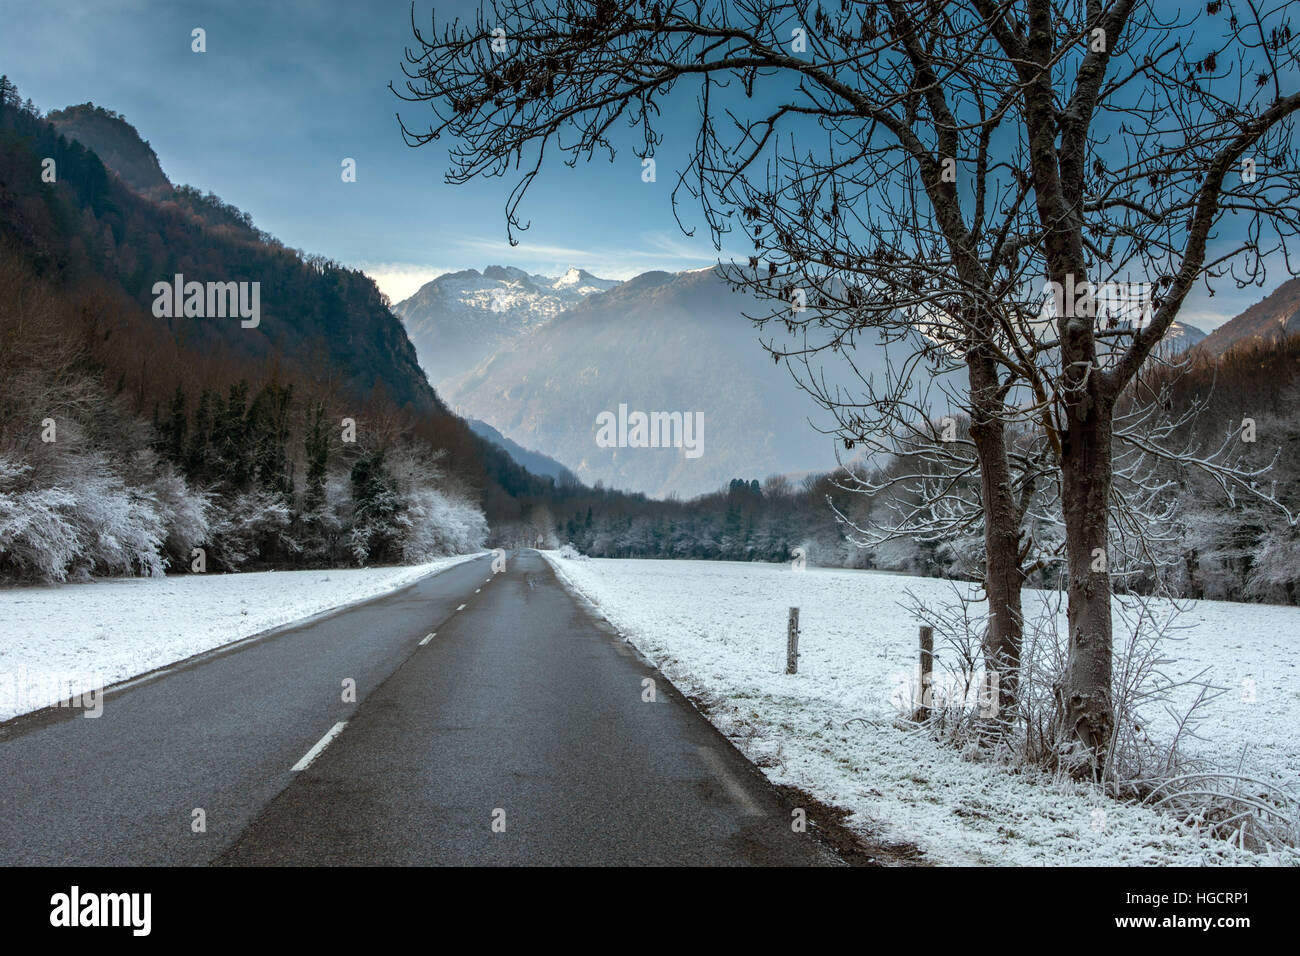 Lonely road running through snowy landscape towards mountains Stock Photo